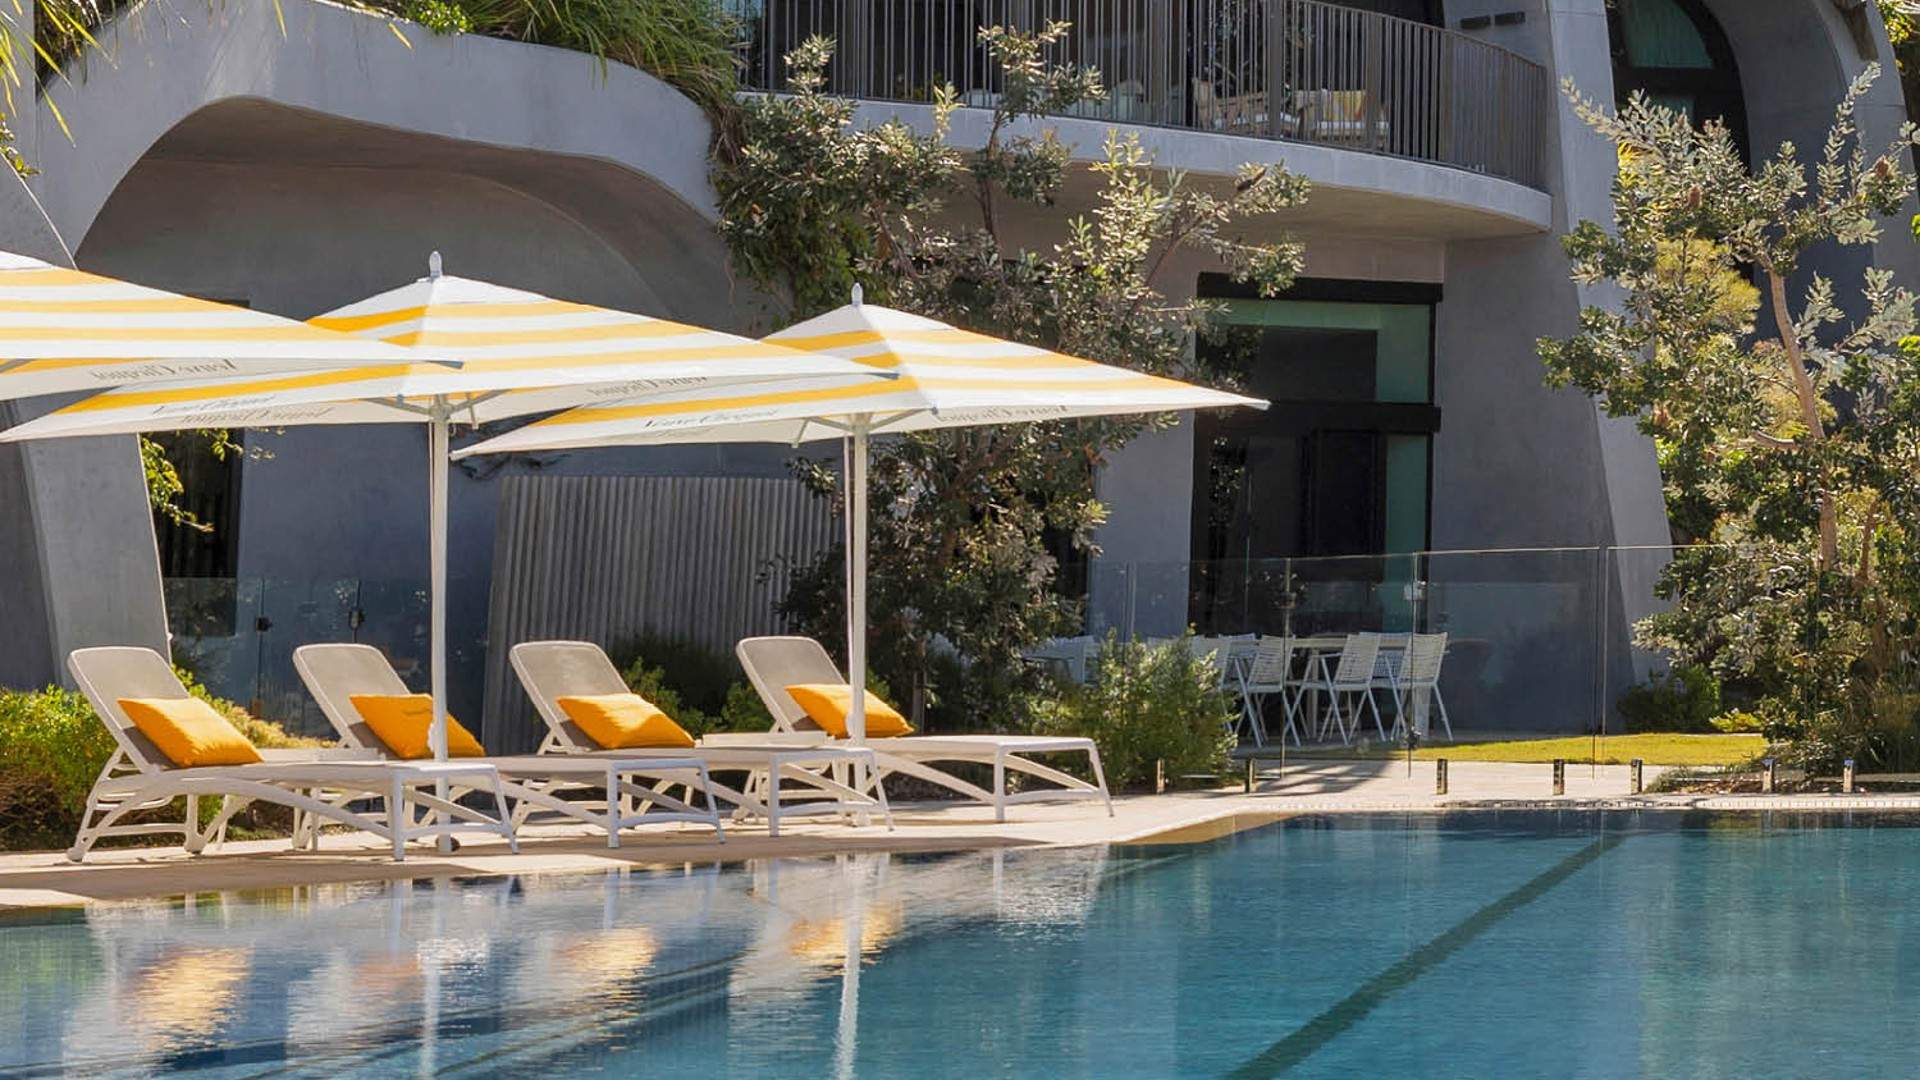 Getaway Alert: The Outrageously Luxe Hotel Clicquot Will Head to Noosa This Summer